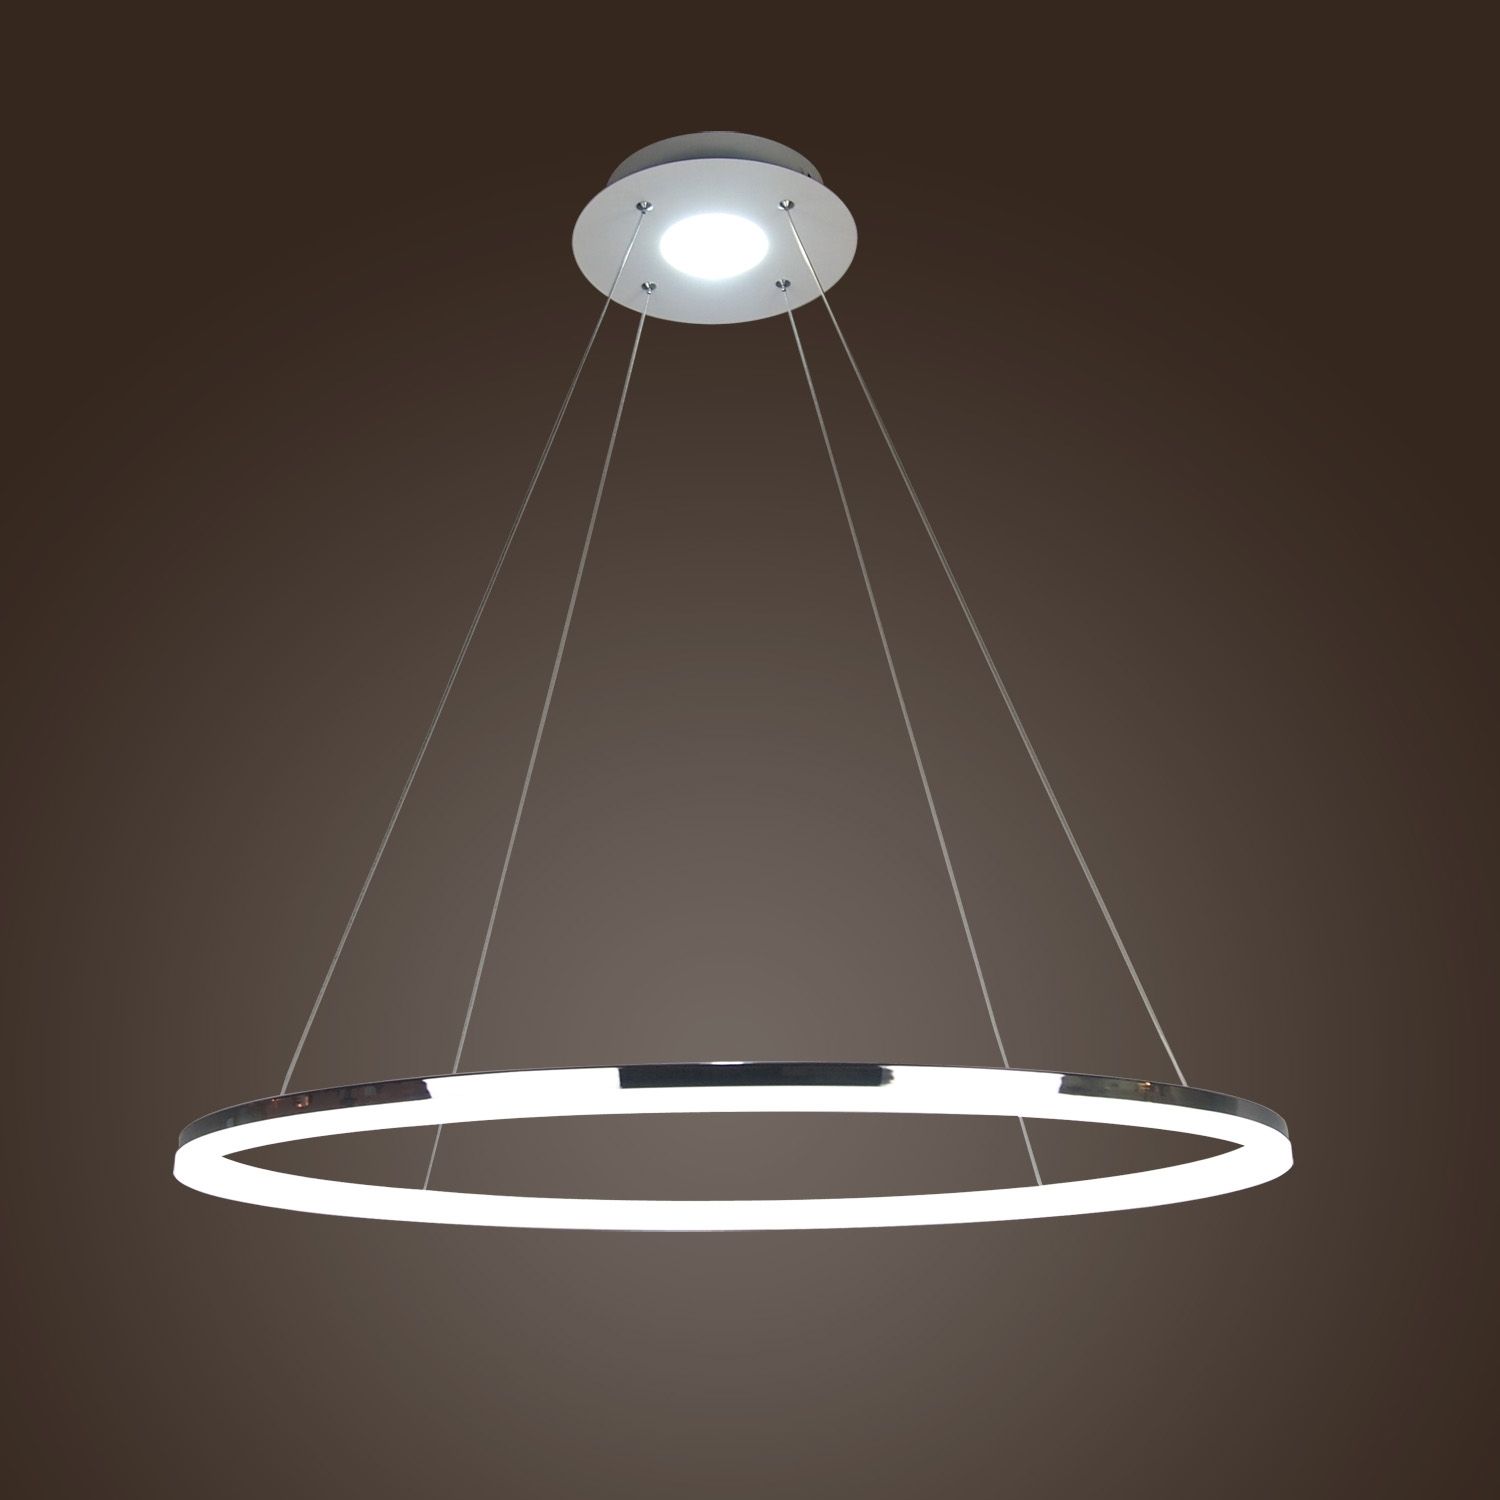 Decorating : Outdoor Ceiling Light For Boats Led 00599wh Aaa World For Outdoor Ceiling Lights At Ebay (Photo 7 of 15)